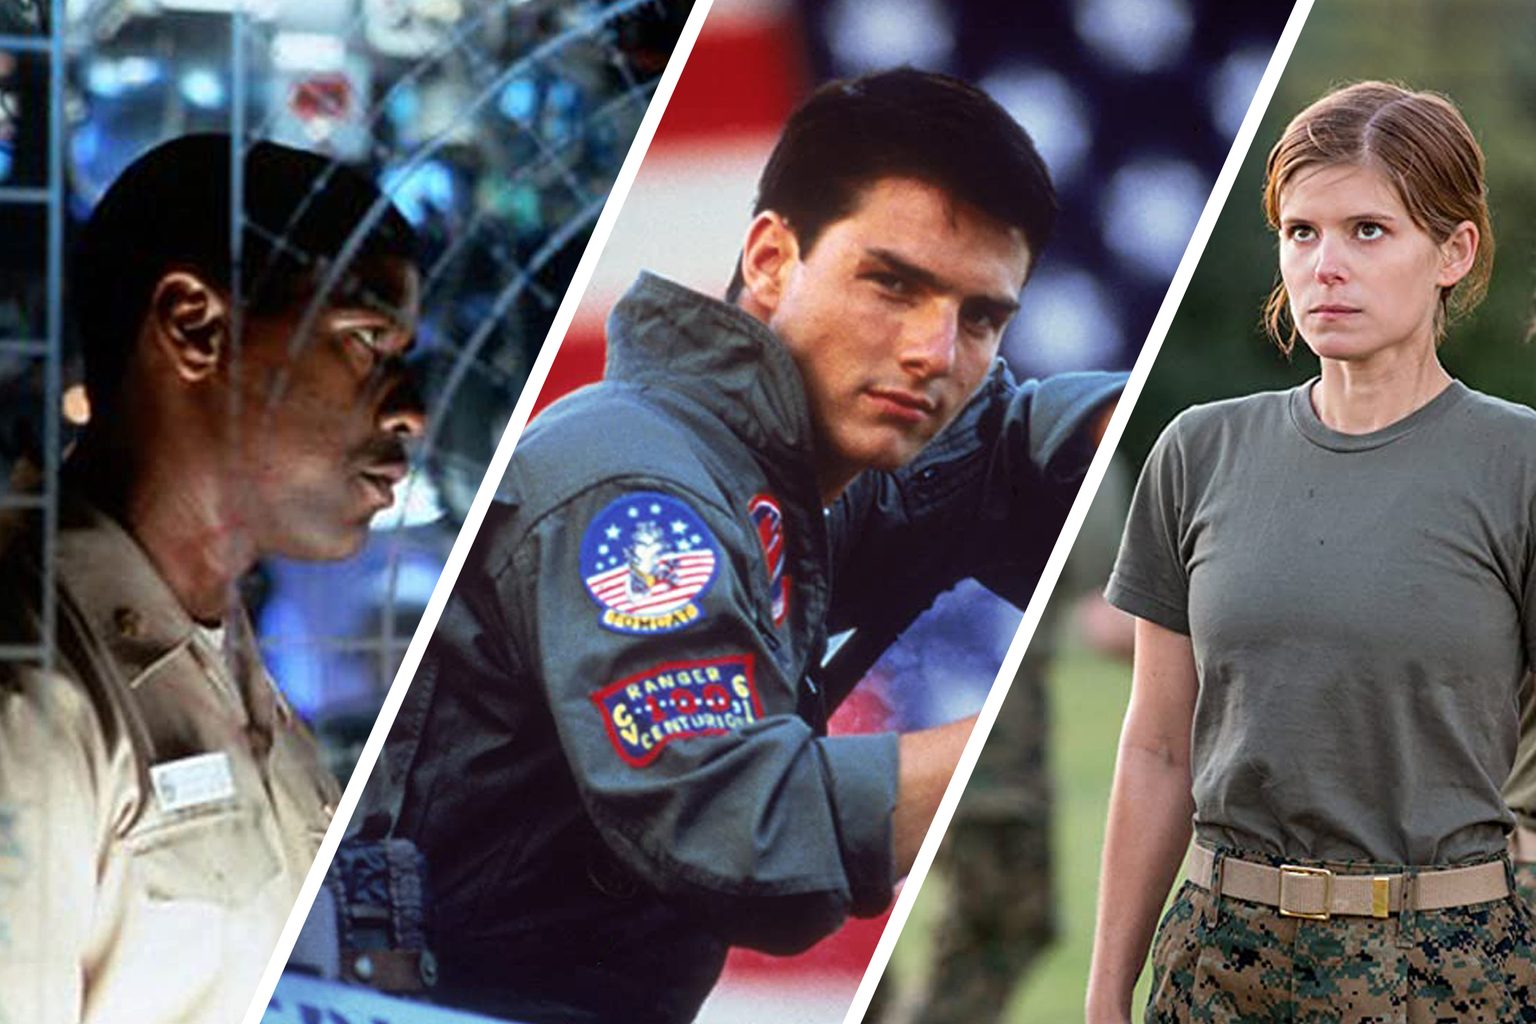 25 Memorial Day Movies to Watch in 2022 — War Movies, Military Stories